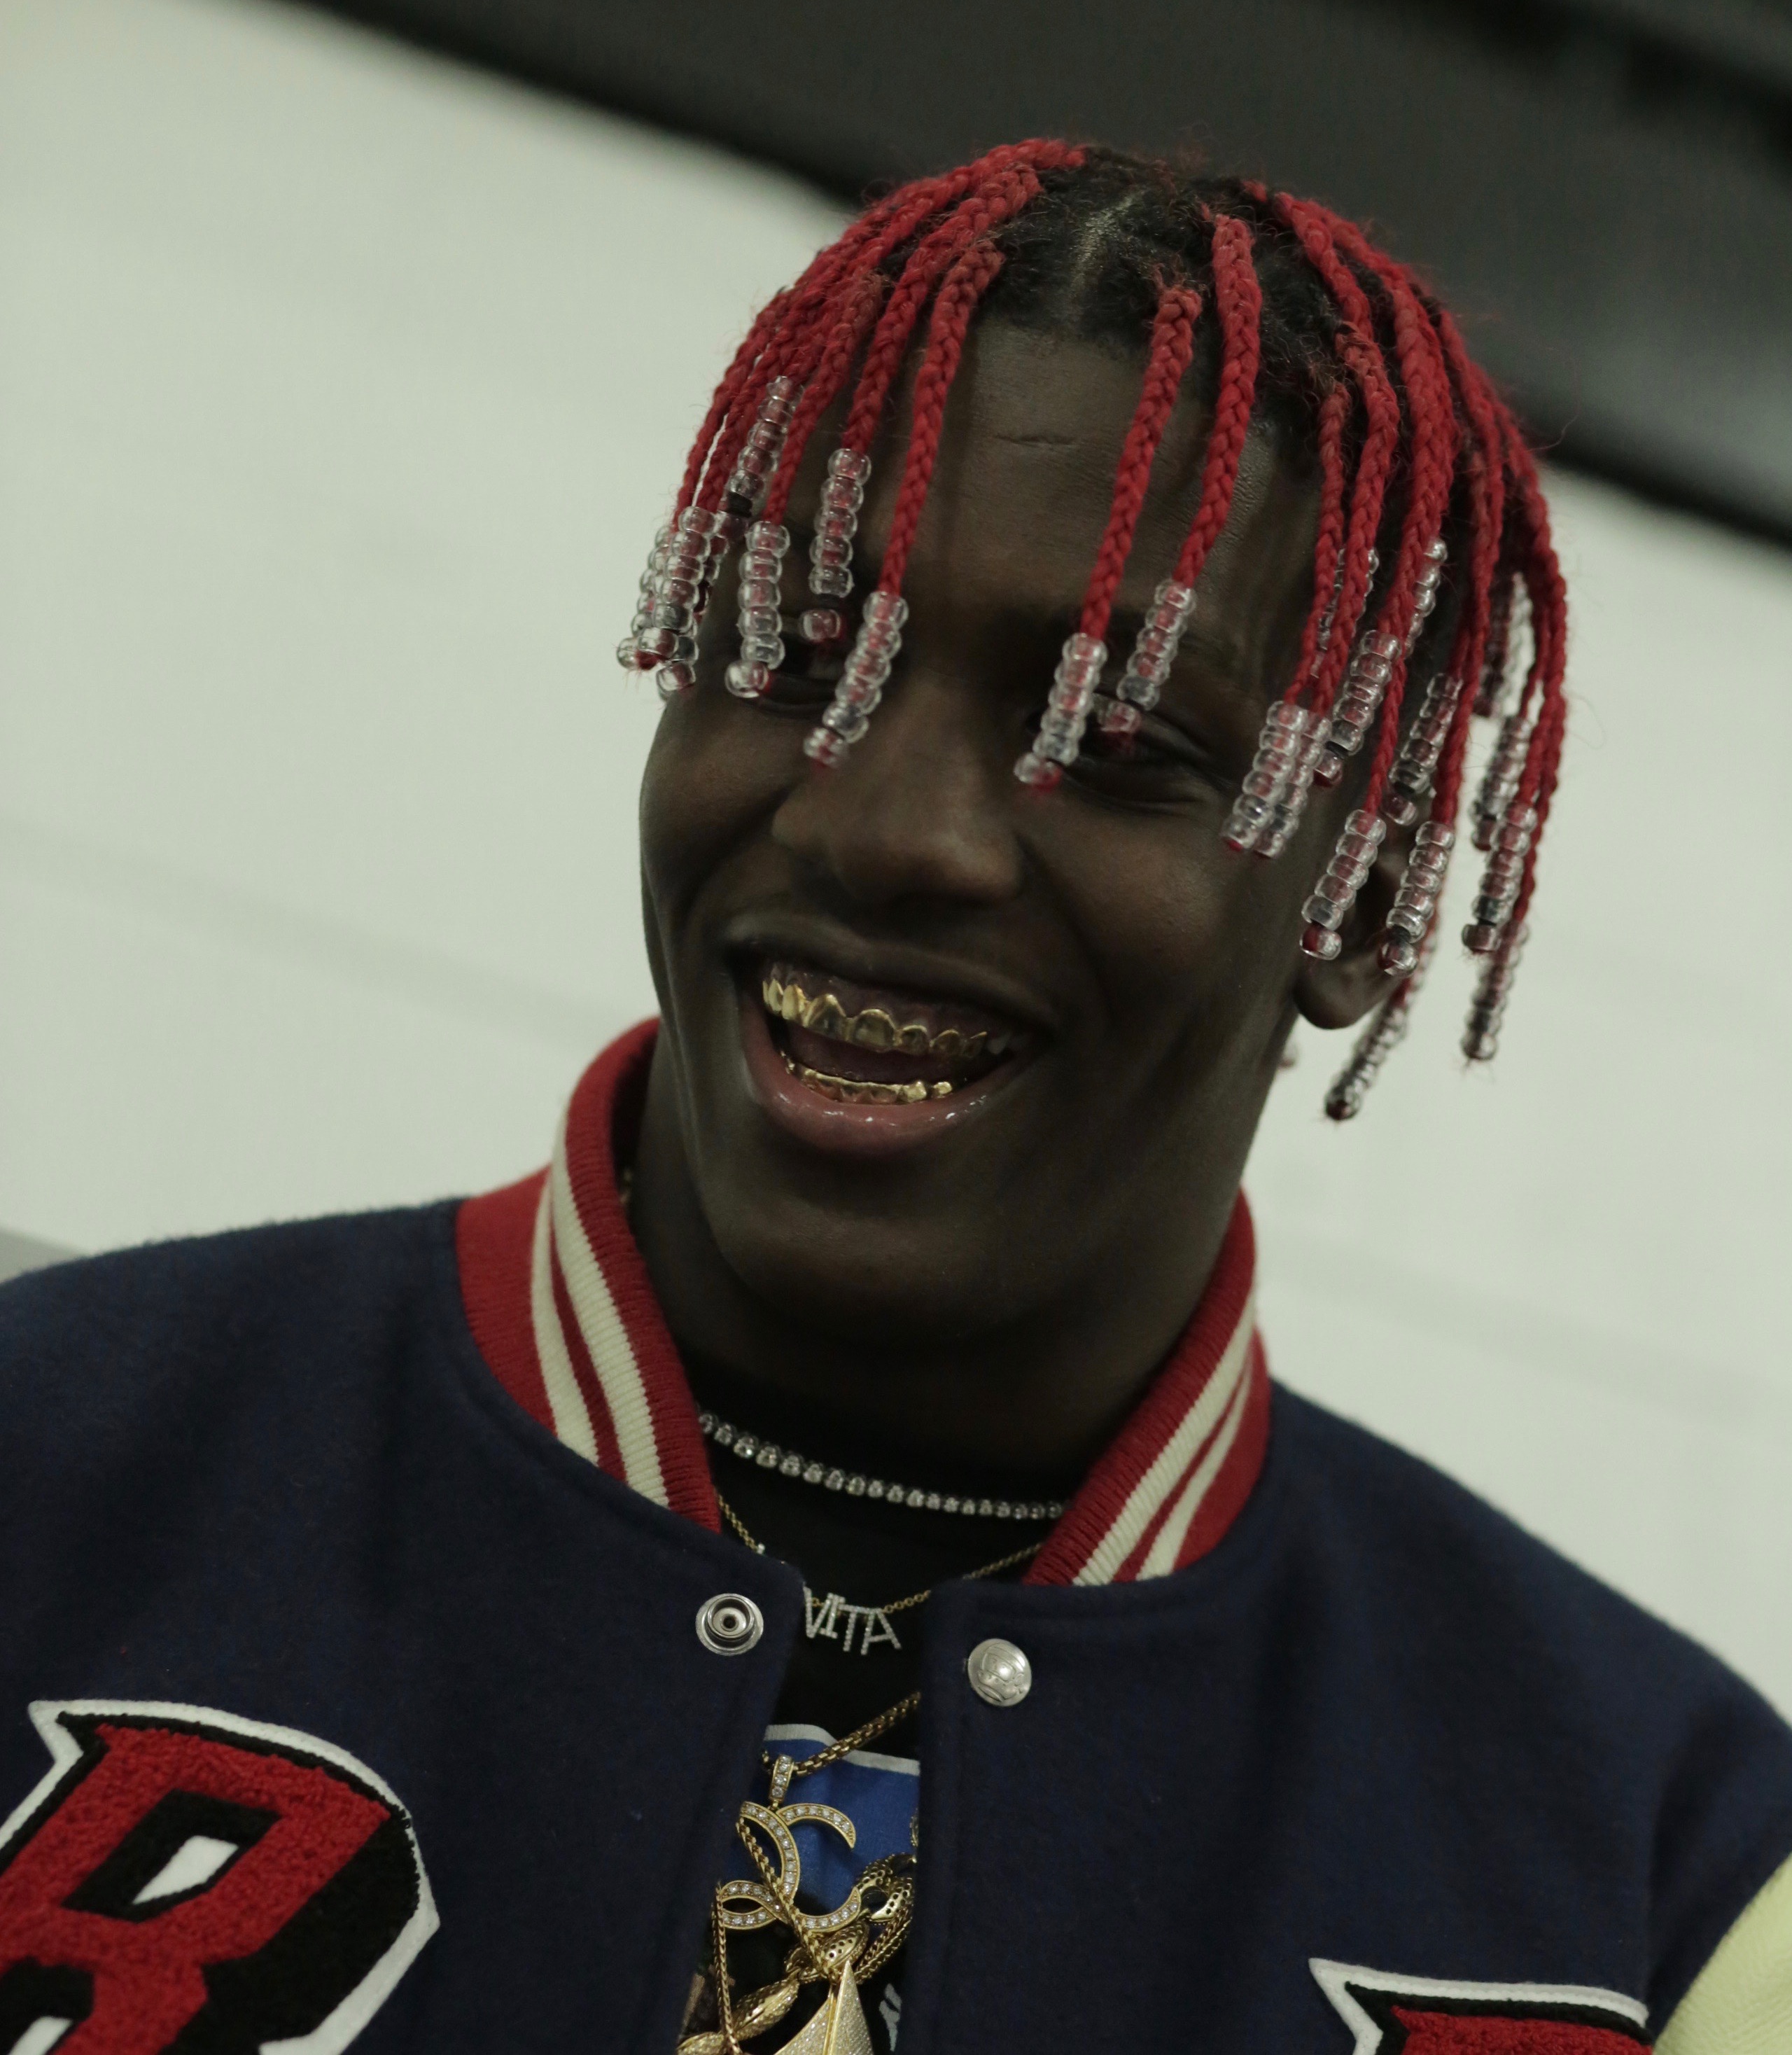 Lil Yachty GIFs | GIPHY